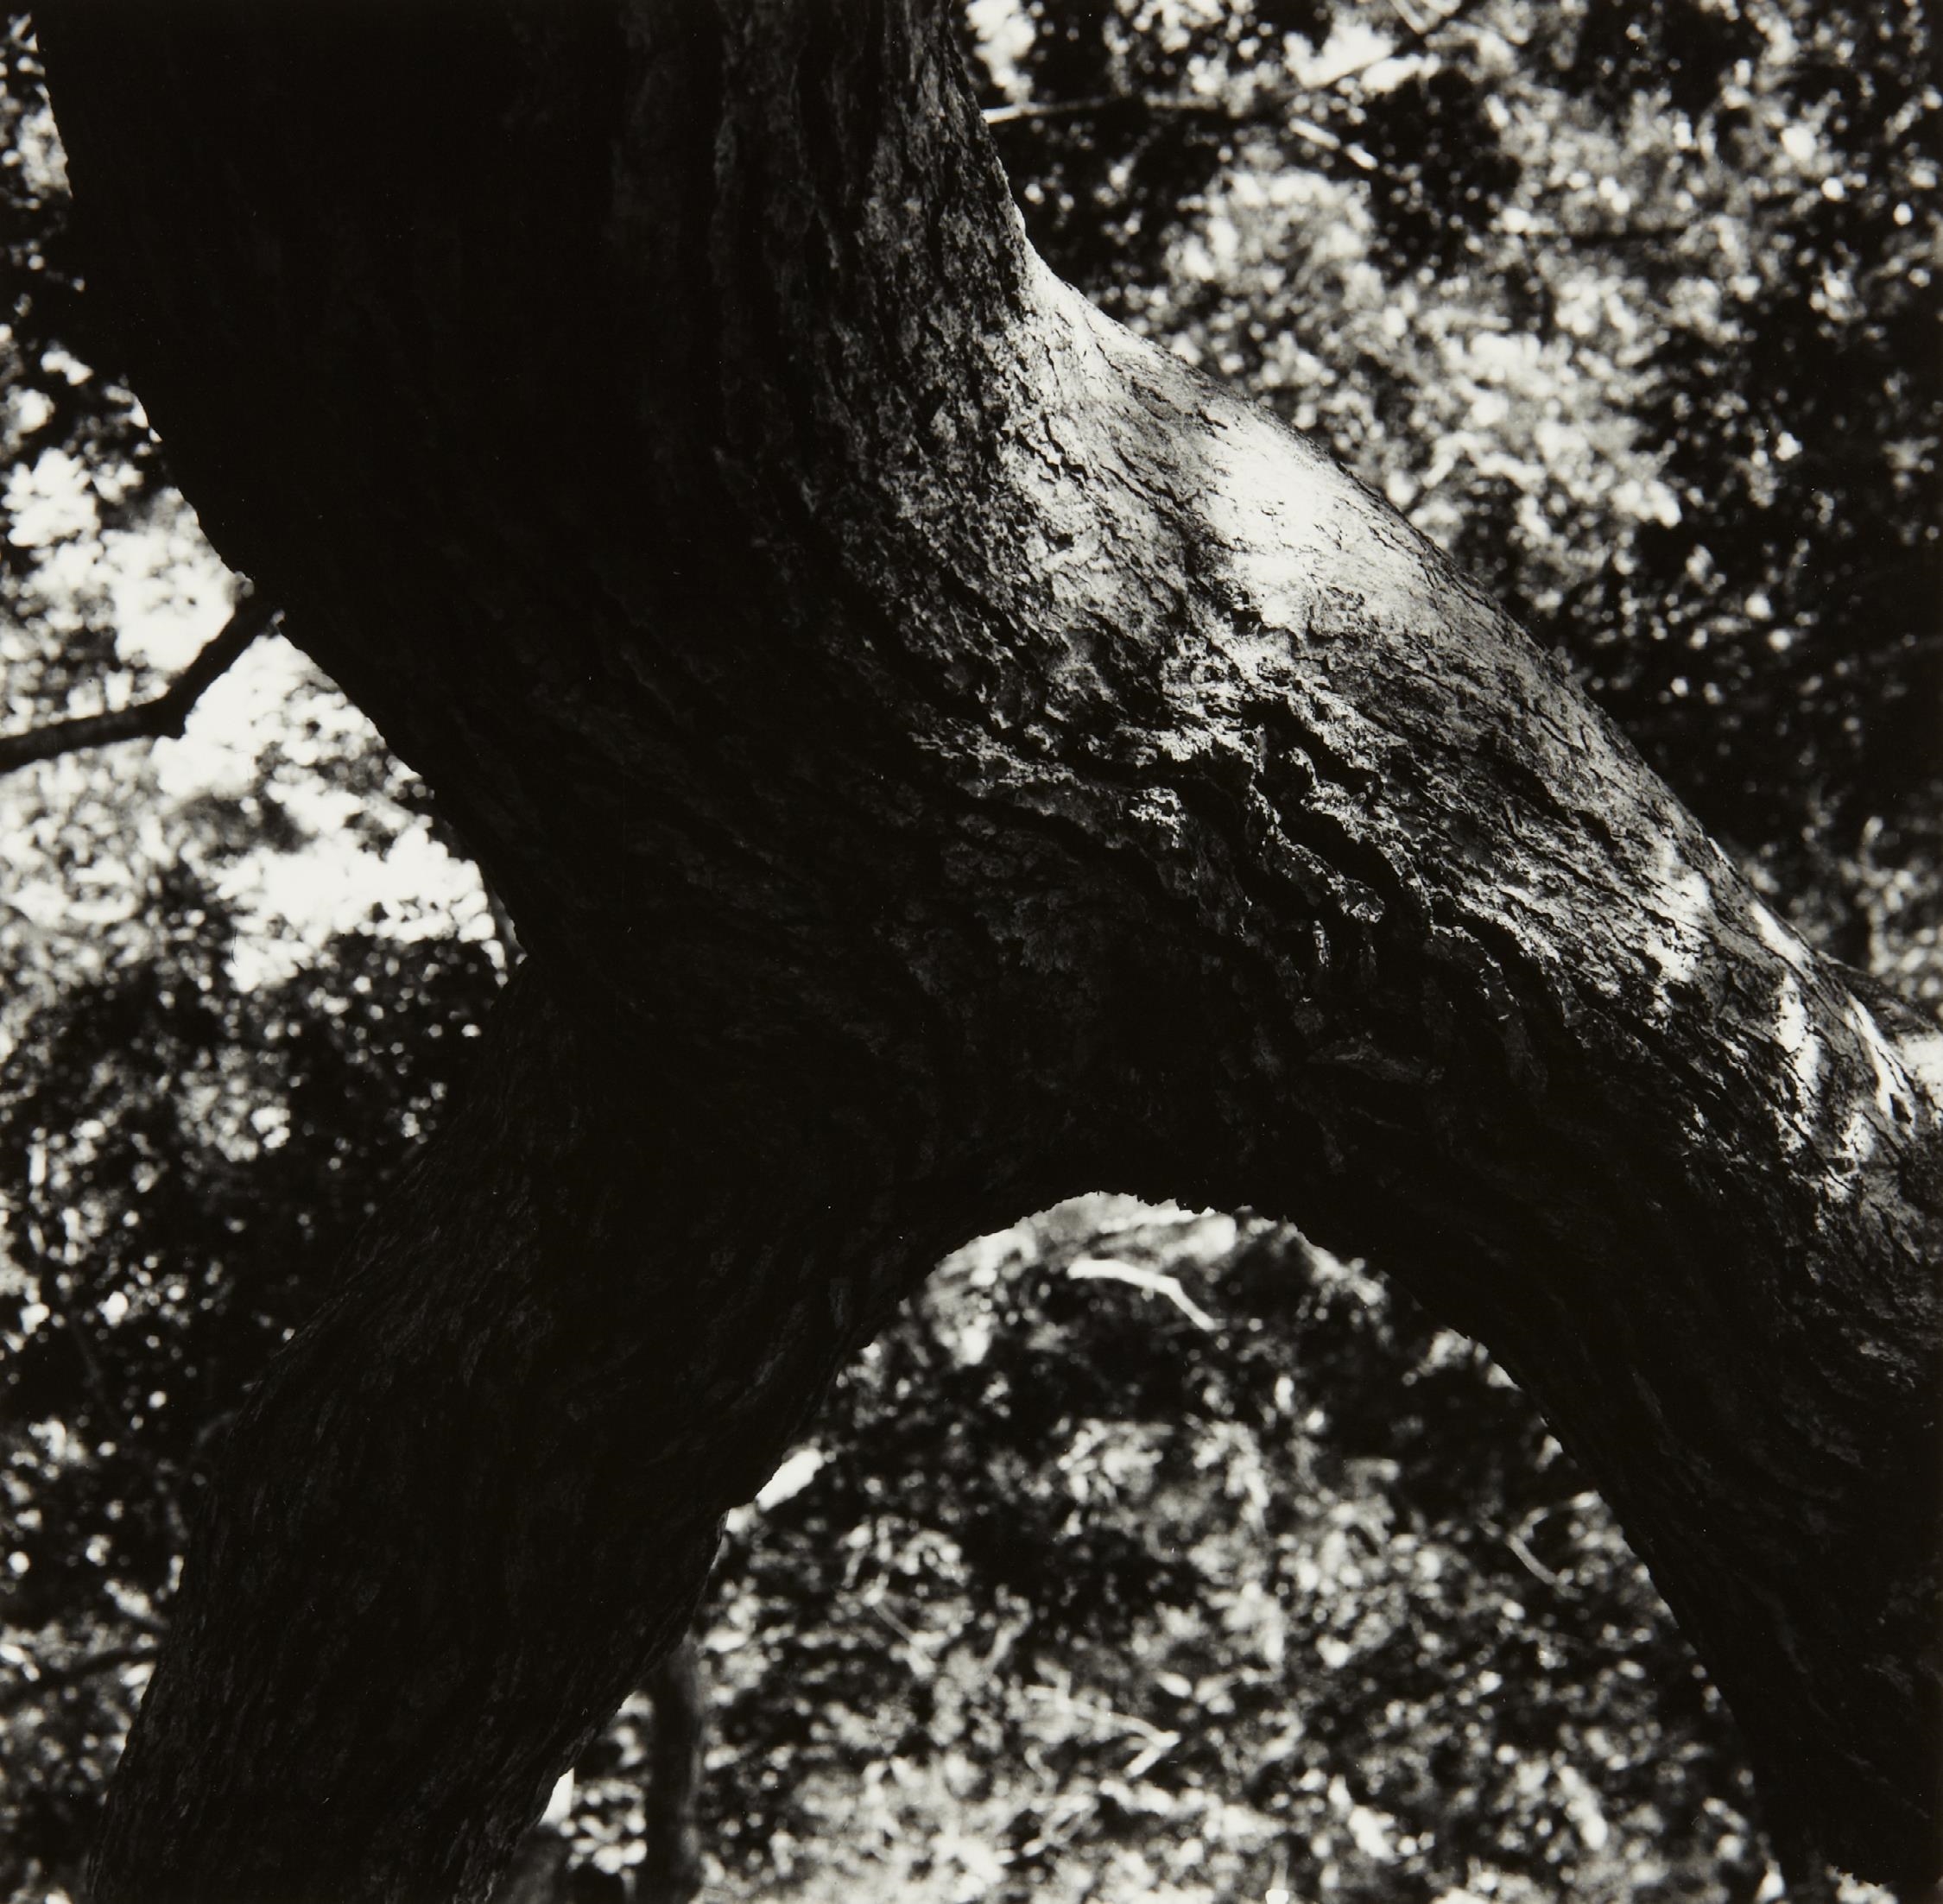 The Tree 108 by Aaron Siskind, 1972